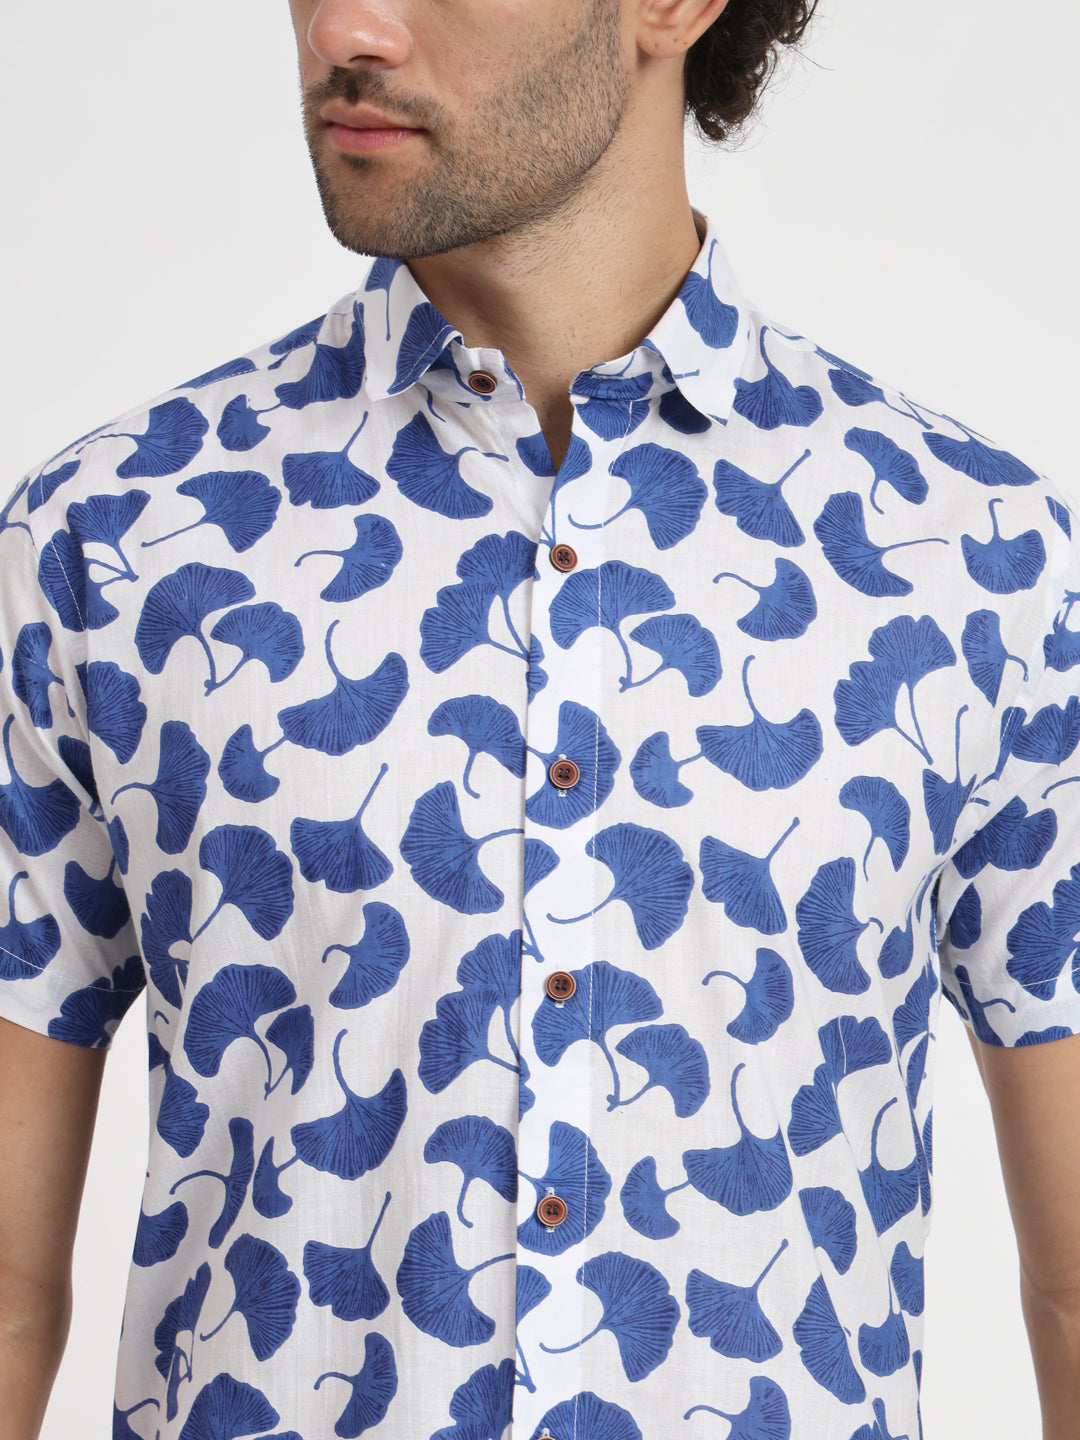 Firangi Yarn Floral Printed Cotton White and Blue Shirt For Men